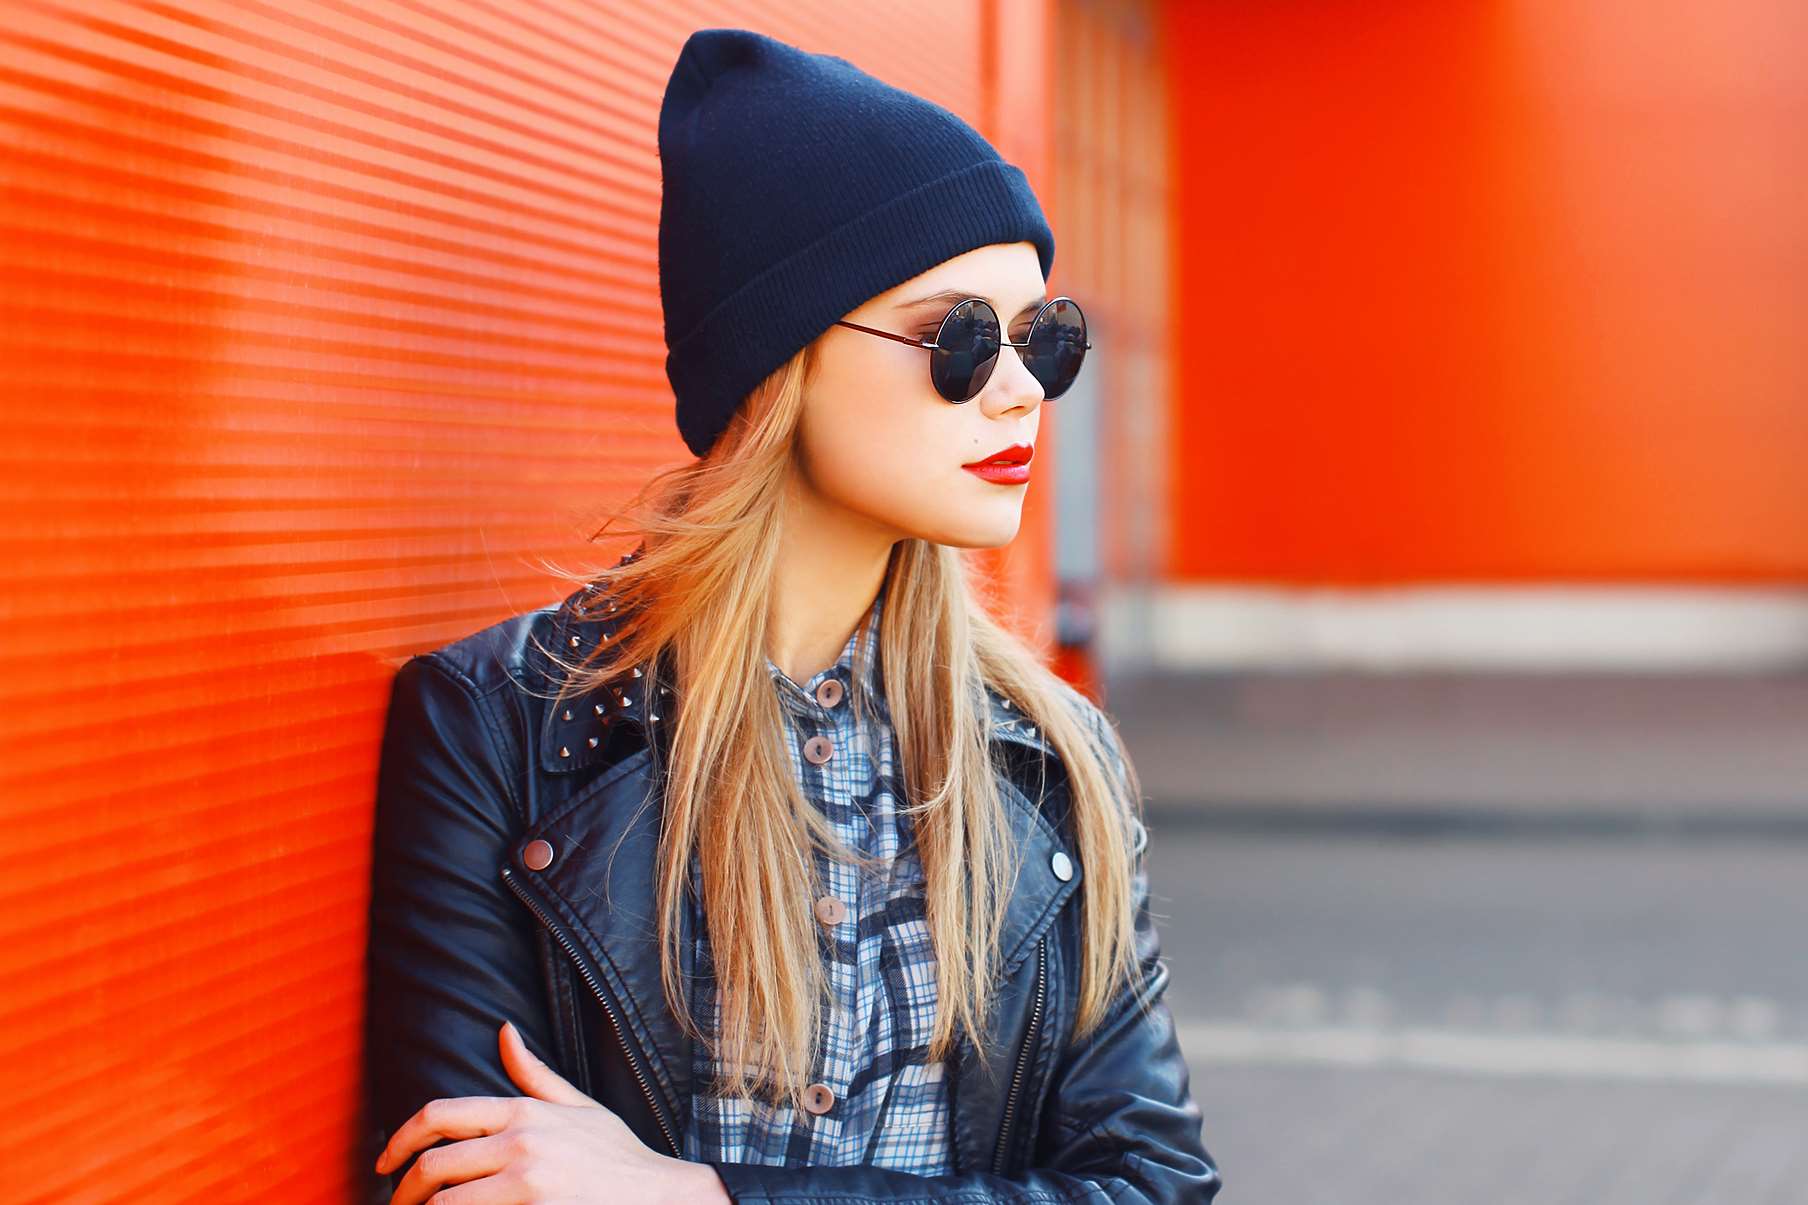 A beanie hat is a must. Even at the height of summer. Style over comfort.